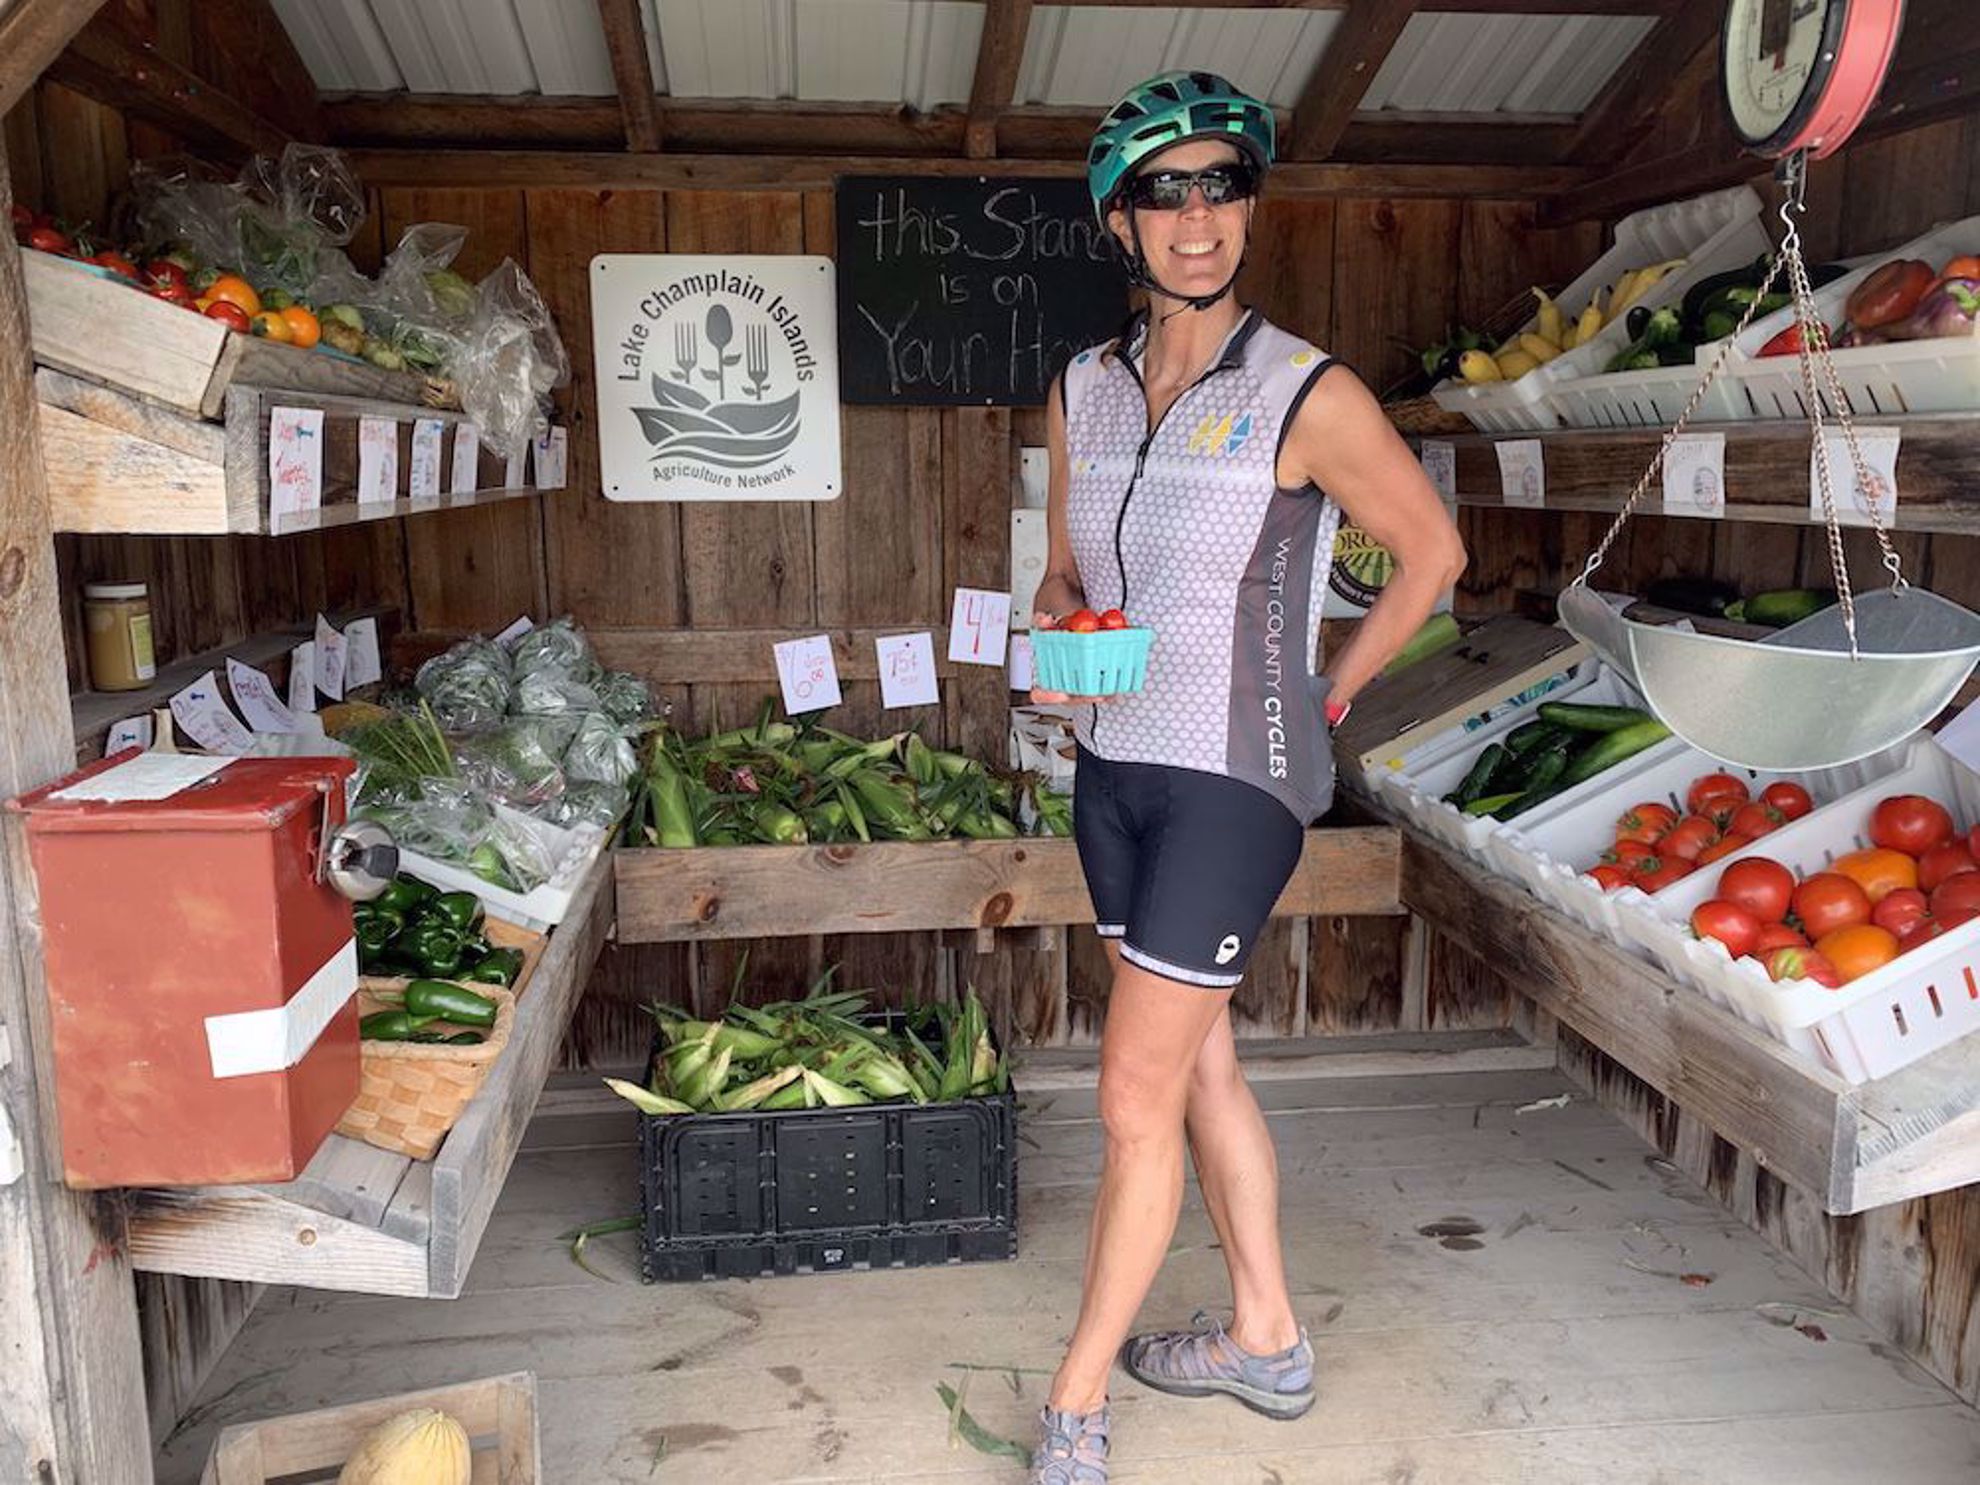 Rider at the farm stand